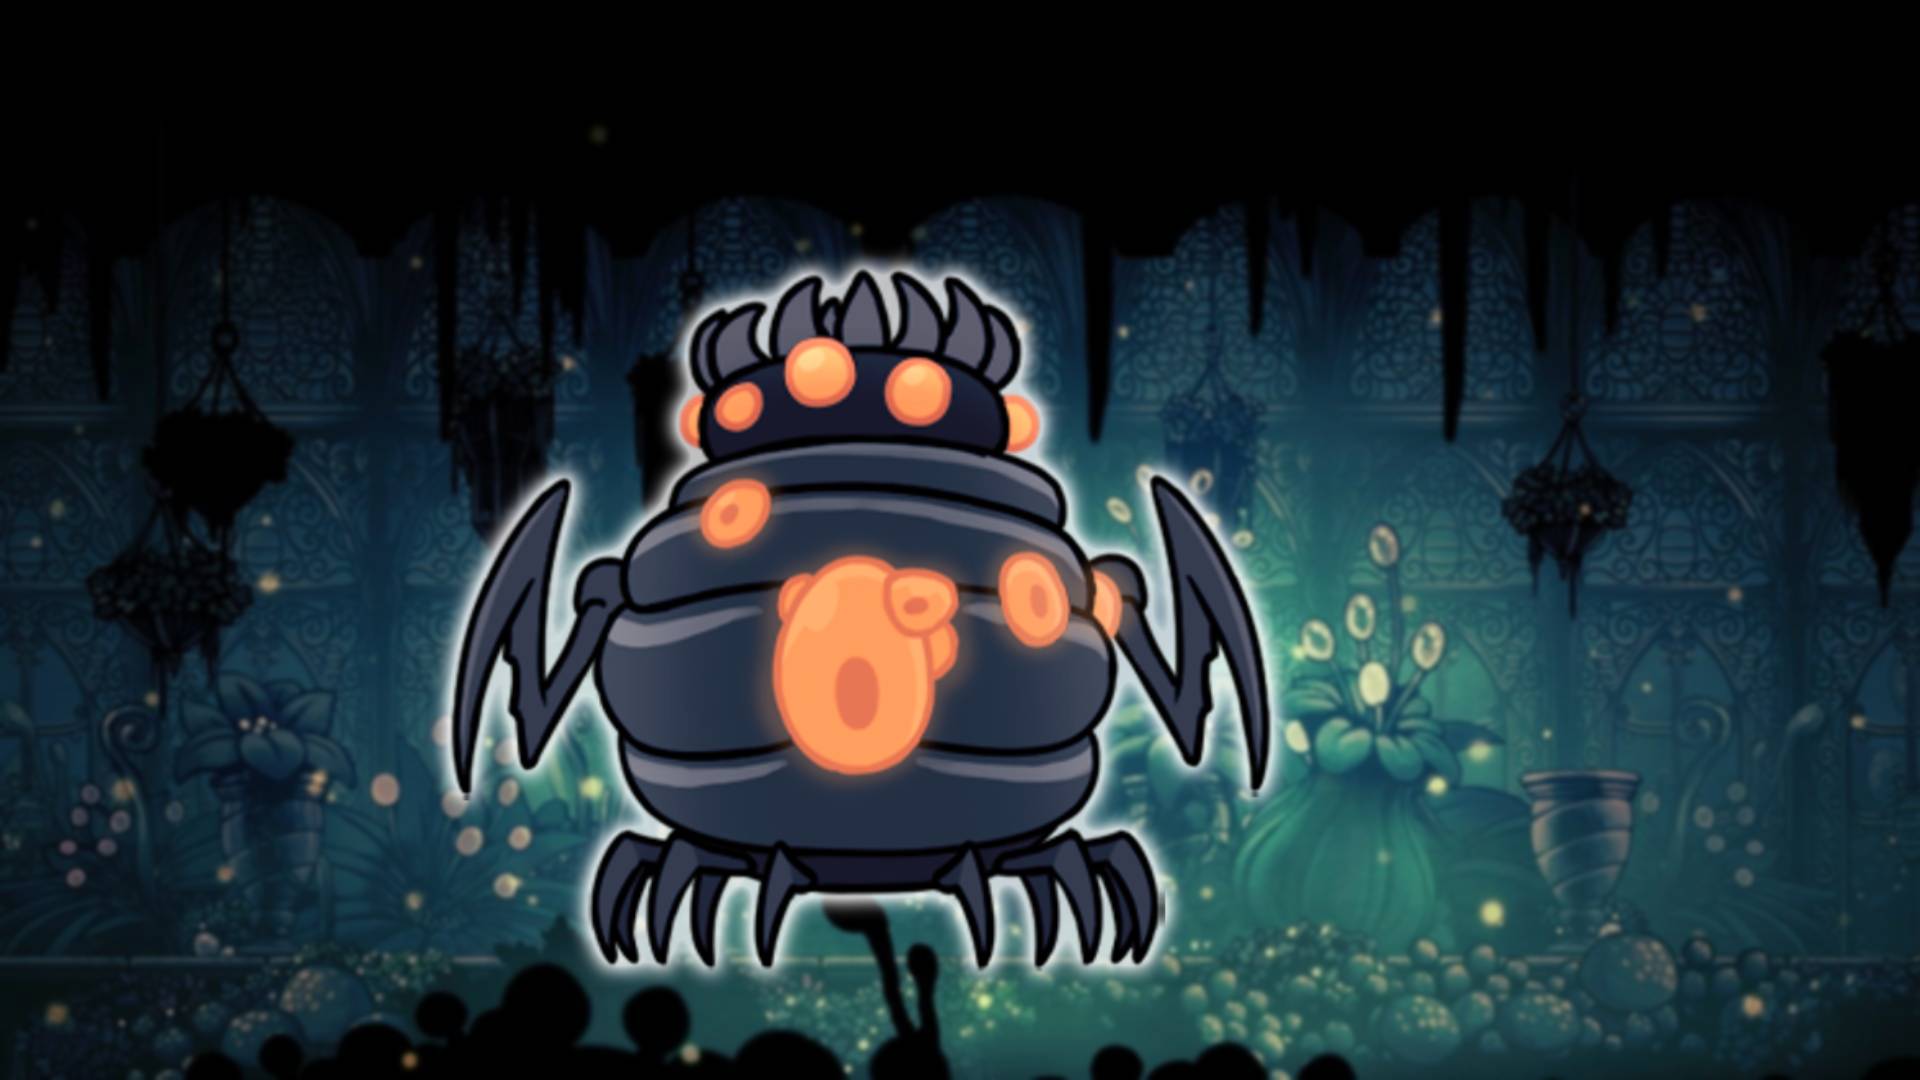 Brooding Mawlek - the Hollow Knight boss, is visible against a mossy green background area from Hollow Knight 